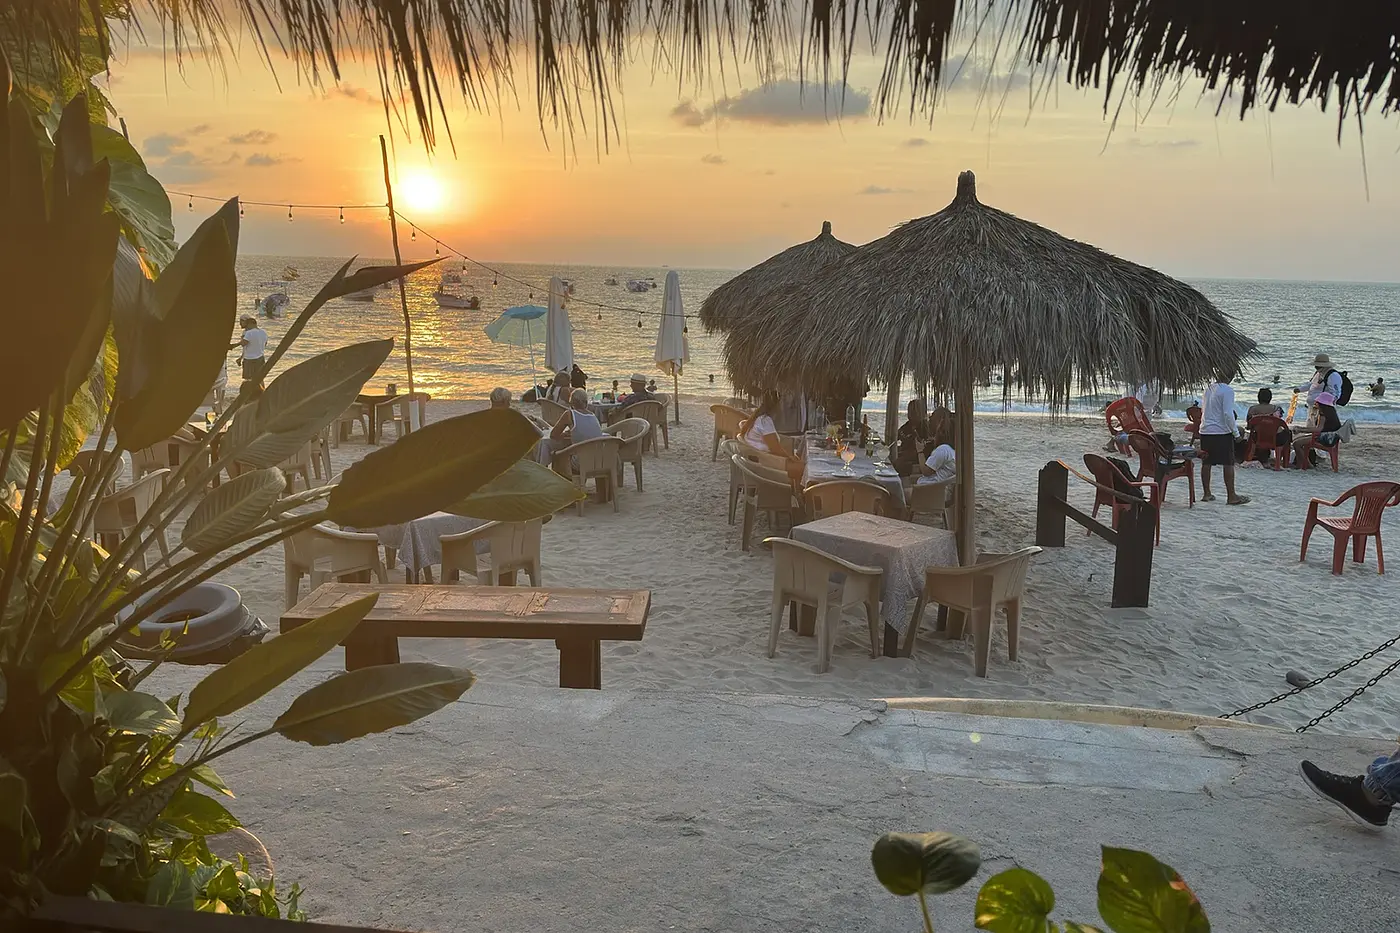 A beach at sunset with palm-leaf umbrellas and people dining.